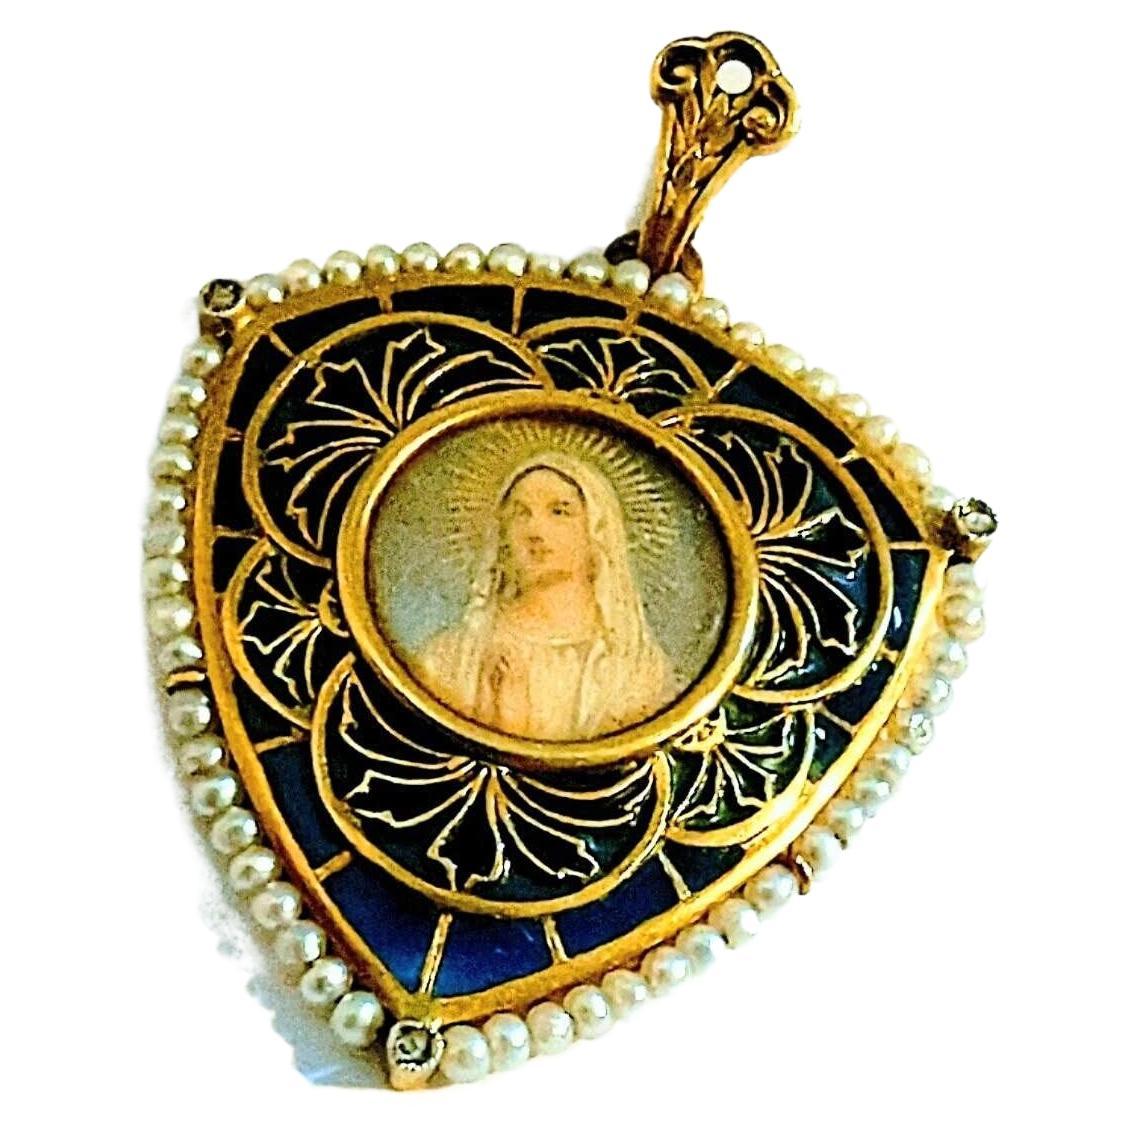 Magnificent chain and medal of the Virgin of Fatima made in yellow gold 18 Karats total weight 7.15 grams, Plique-à-jour enamel in beautiful blue, red and green tones and painted image of 13 millimeters in diameter. Surrounded by 55 pearls alófar of